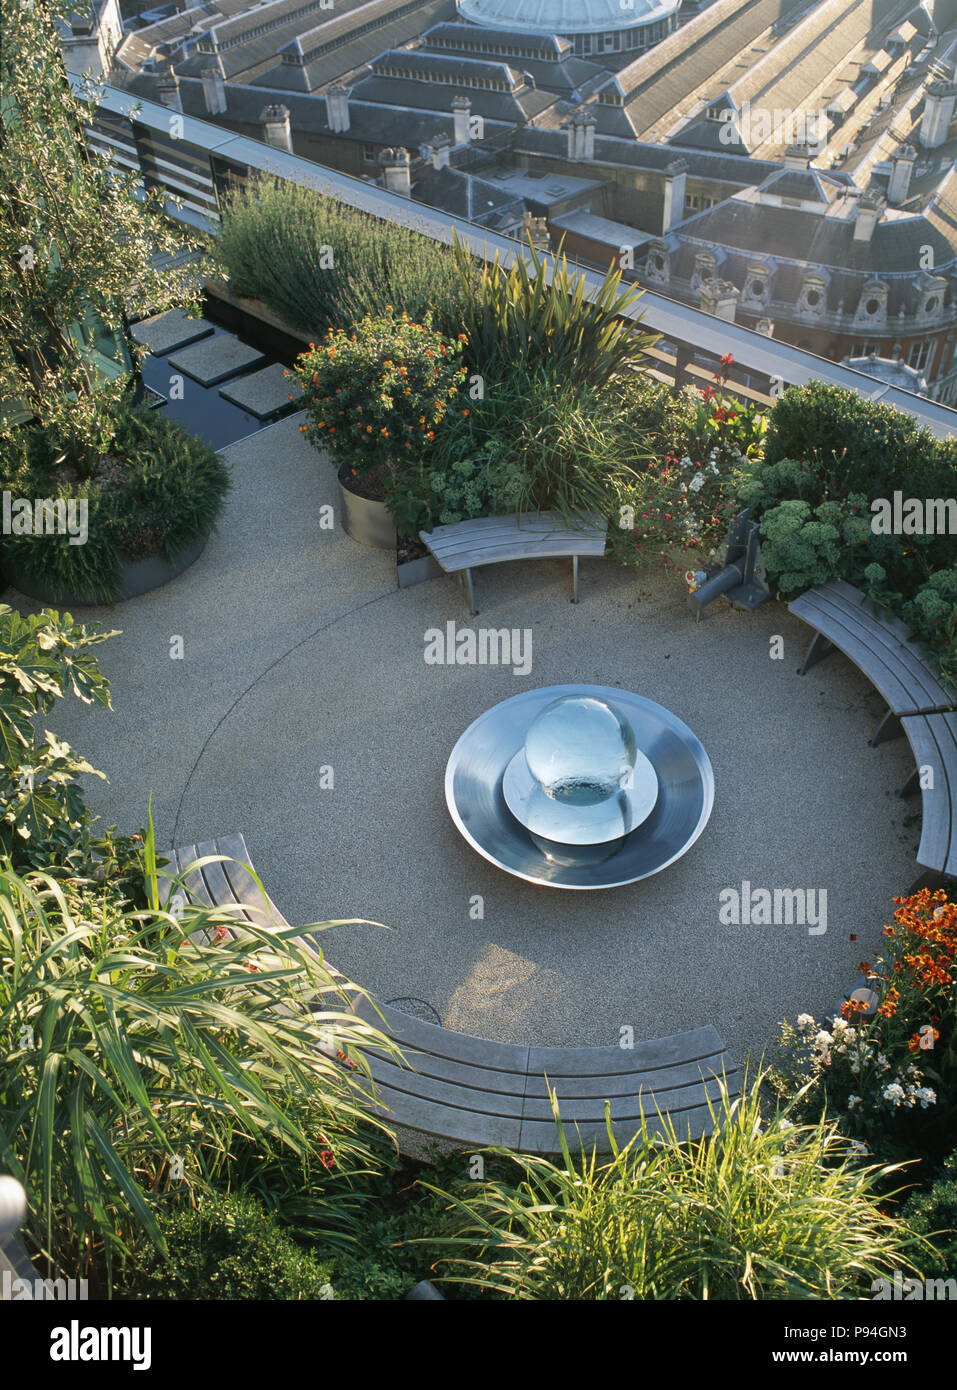 Birdseye view of curved benches around chrome bubble pool on lushly planted city roof terrace Stock Photo